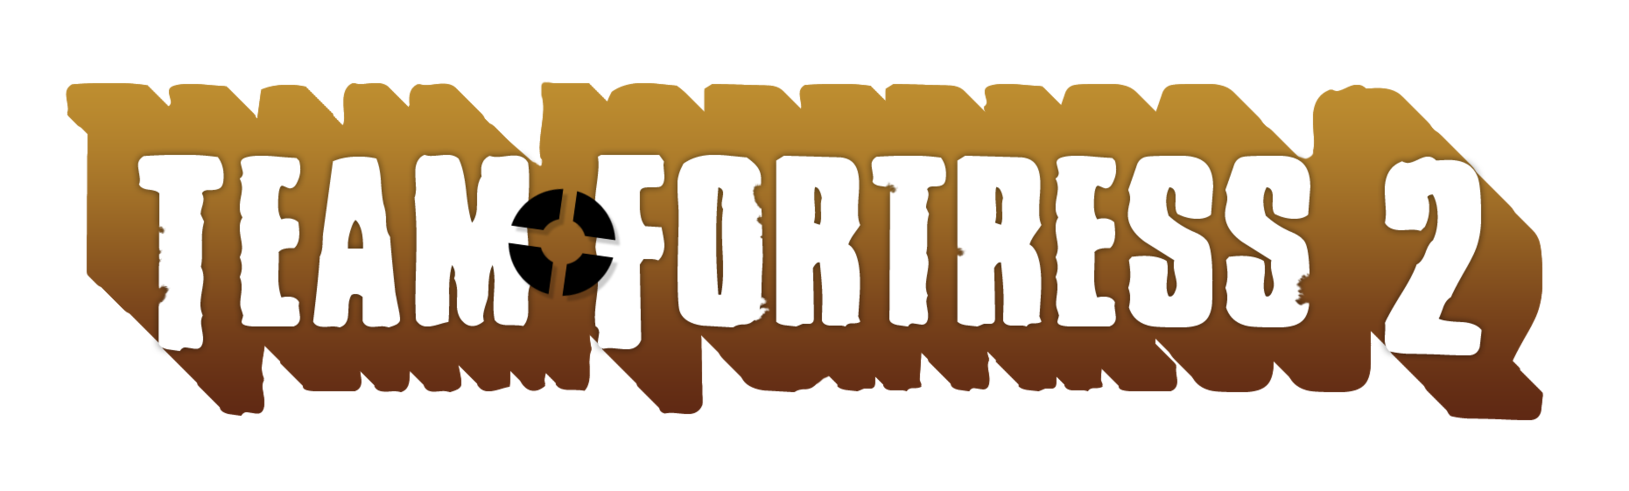 Game event team fortress. Youtube clipart tf2